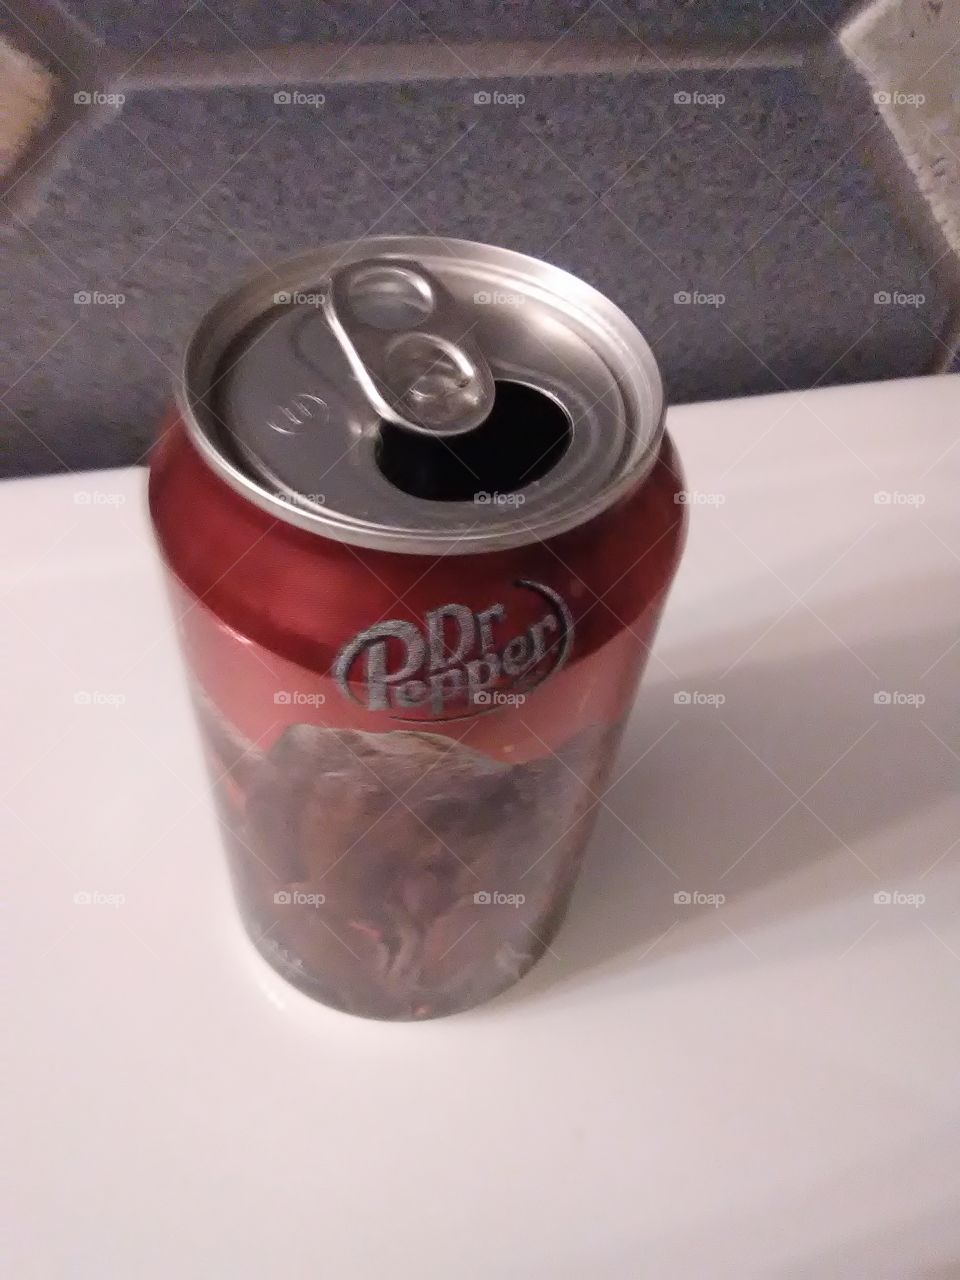 single Dr. pepper can